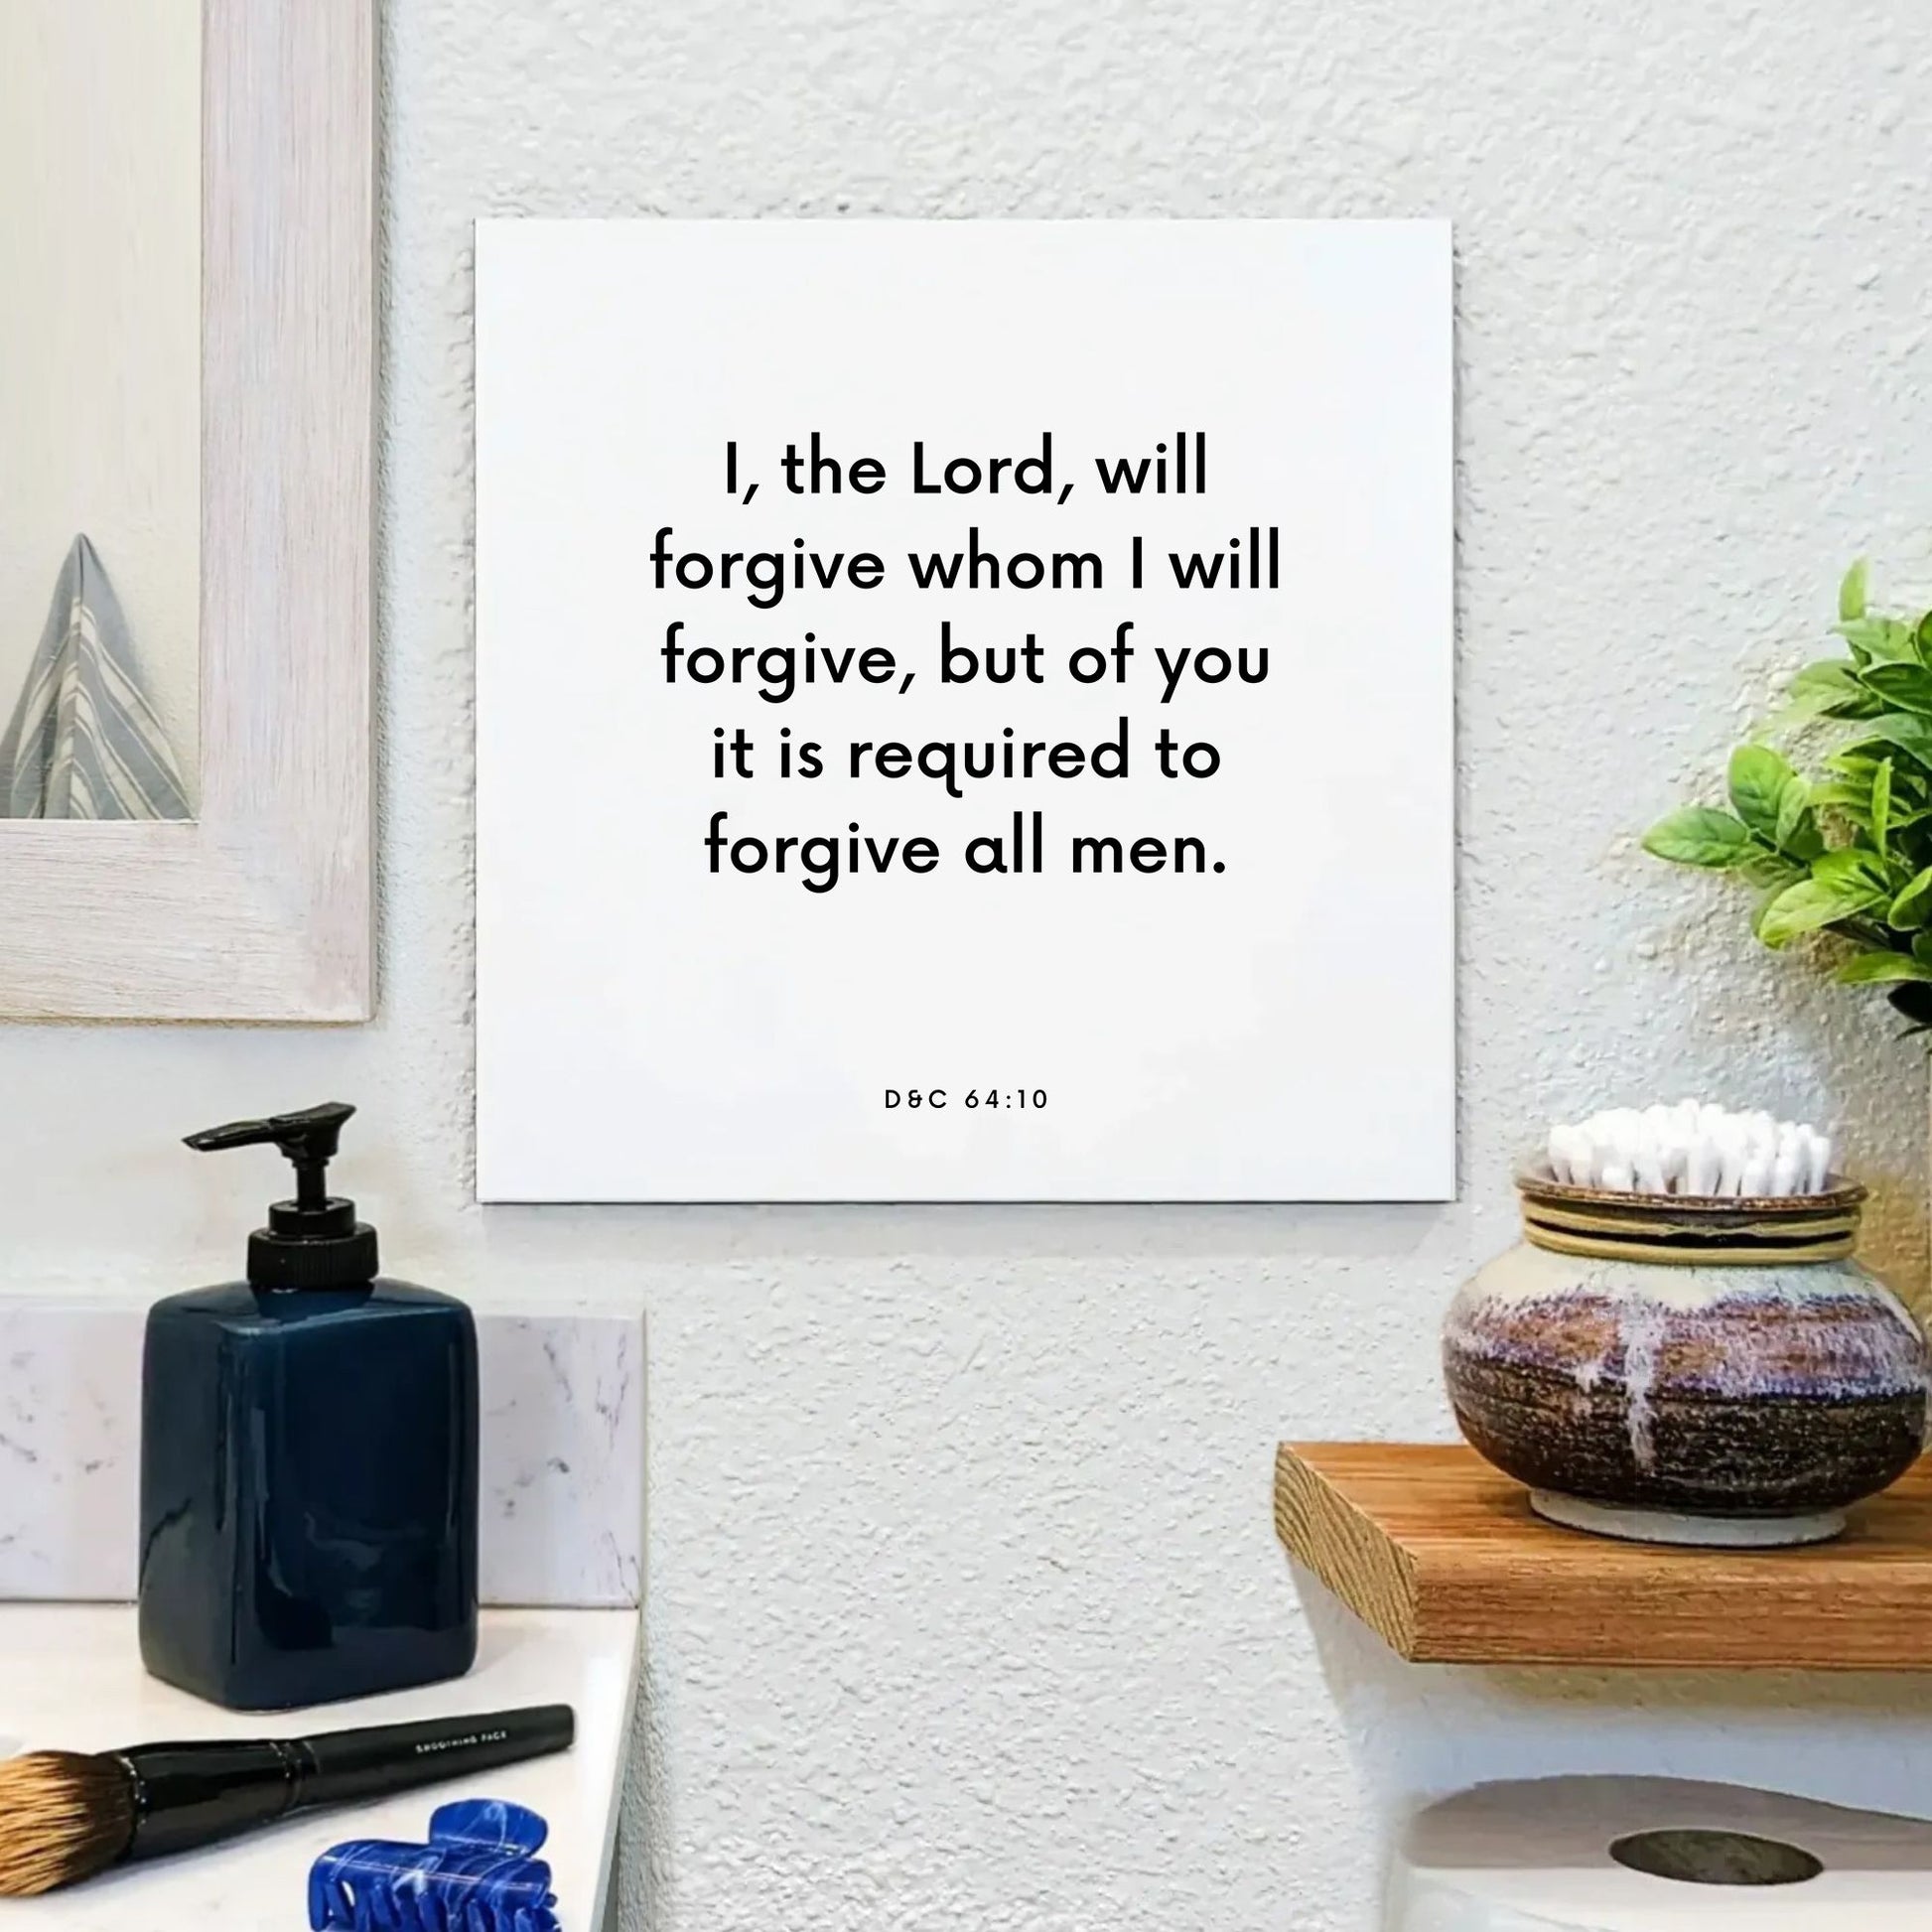 Bathroom mouting of the scripture tile for D&C 64:10 - "Of you it is required to forgive all men"